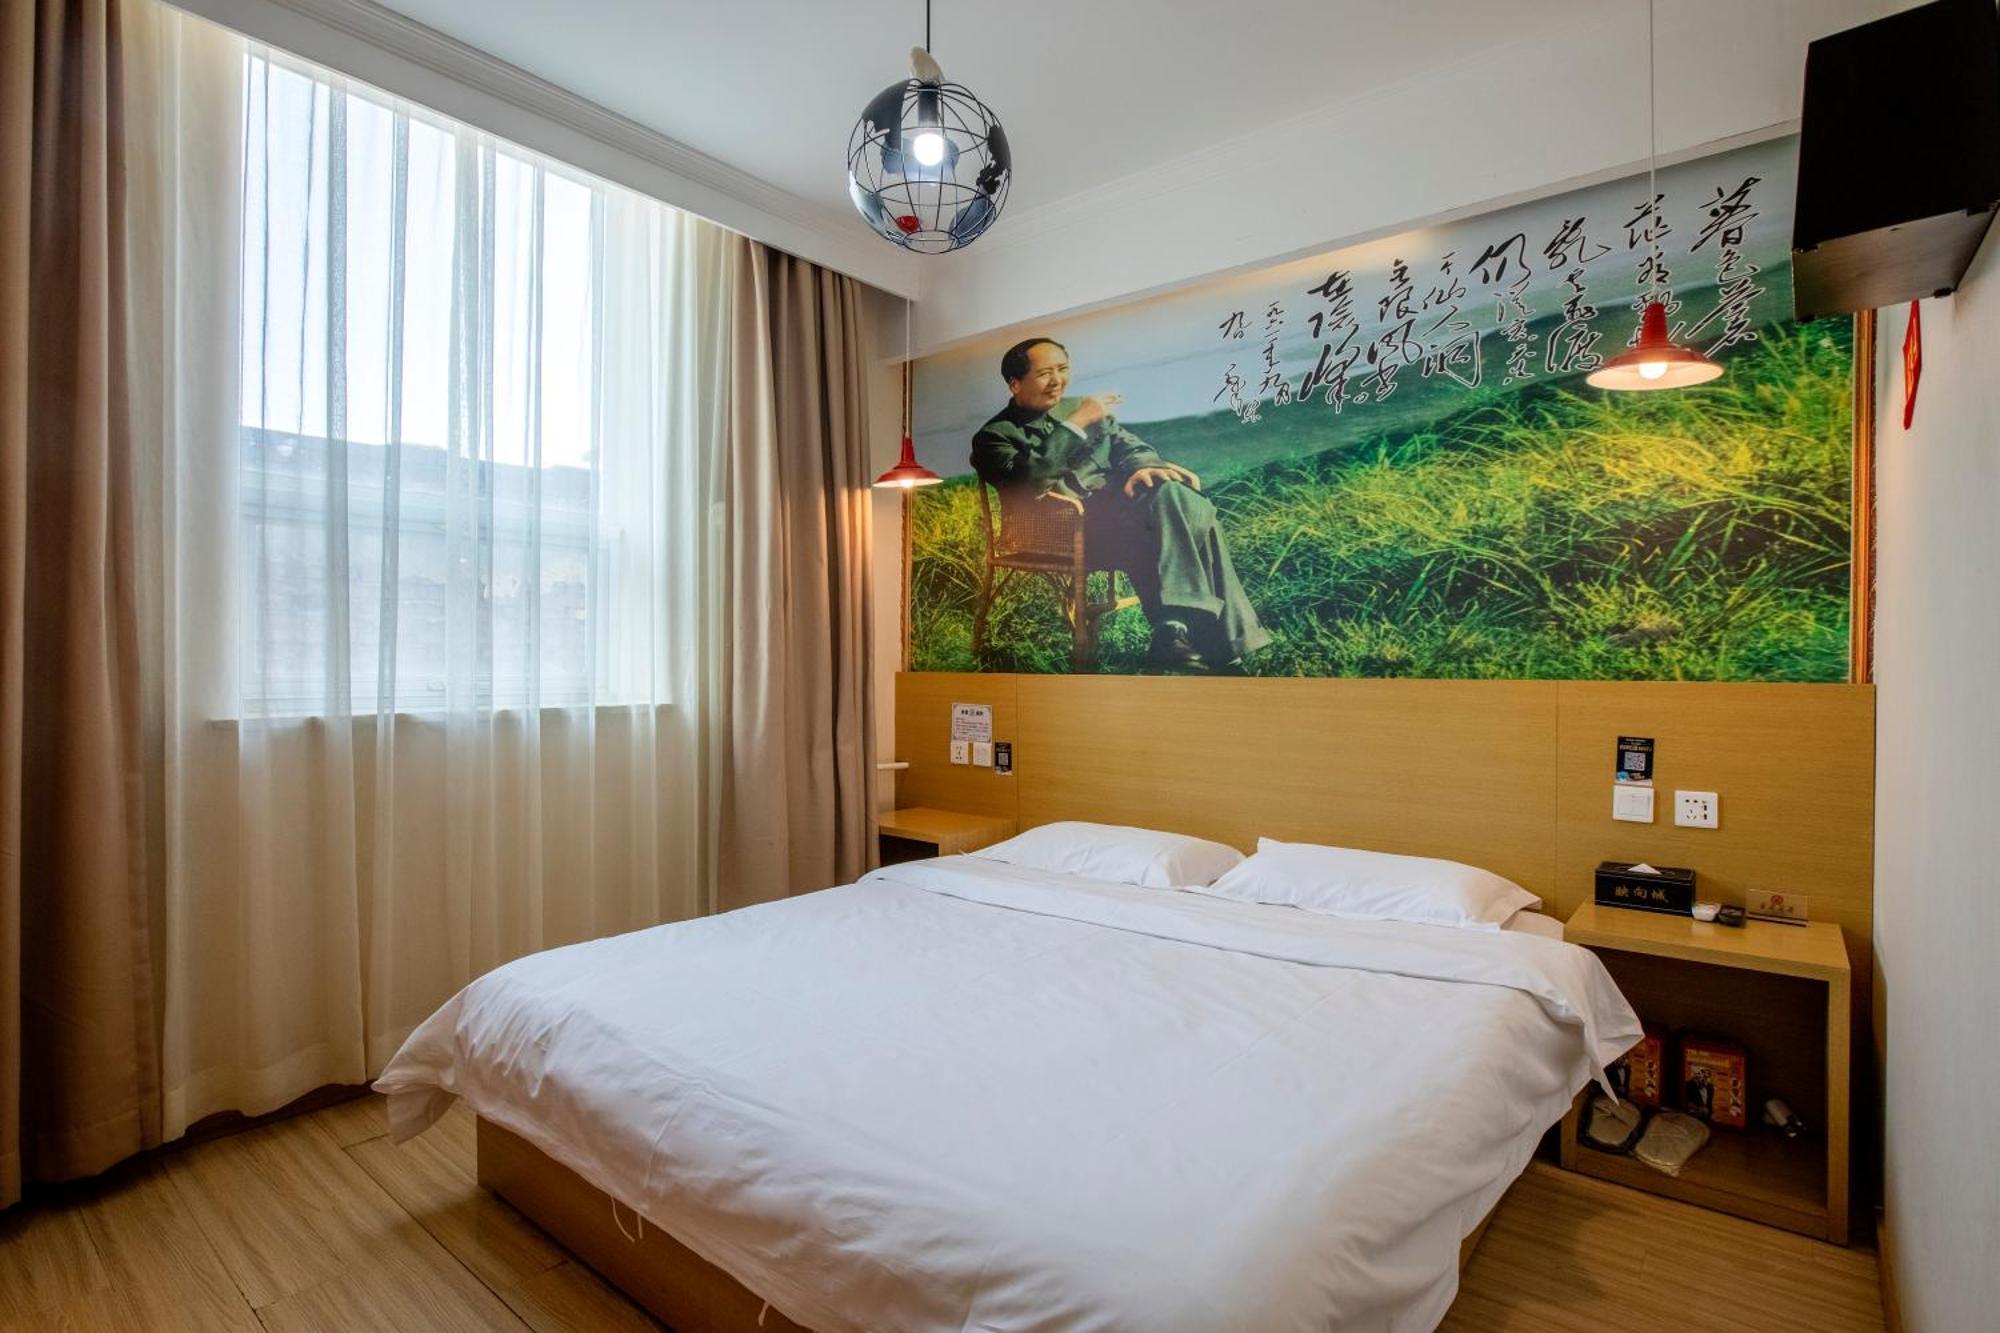 Happy Dragon Alley Hotel-In The City Center With Big Window&Free Coffe, Fluent English Speaking,Tourist Attractions Ticket Service&Food Recommendation,Near Tian Anmen Forbiddencity,Near Lama Temple,Easy To Walk To Nanluoalley&Shichahai Пекин Экстерьер фото